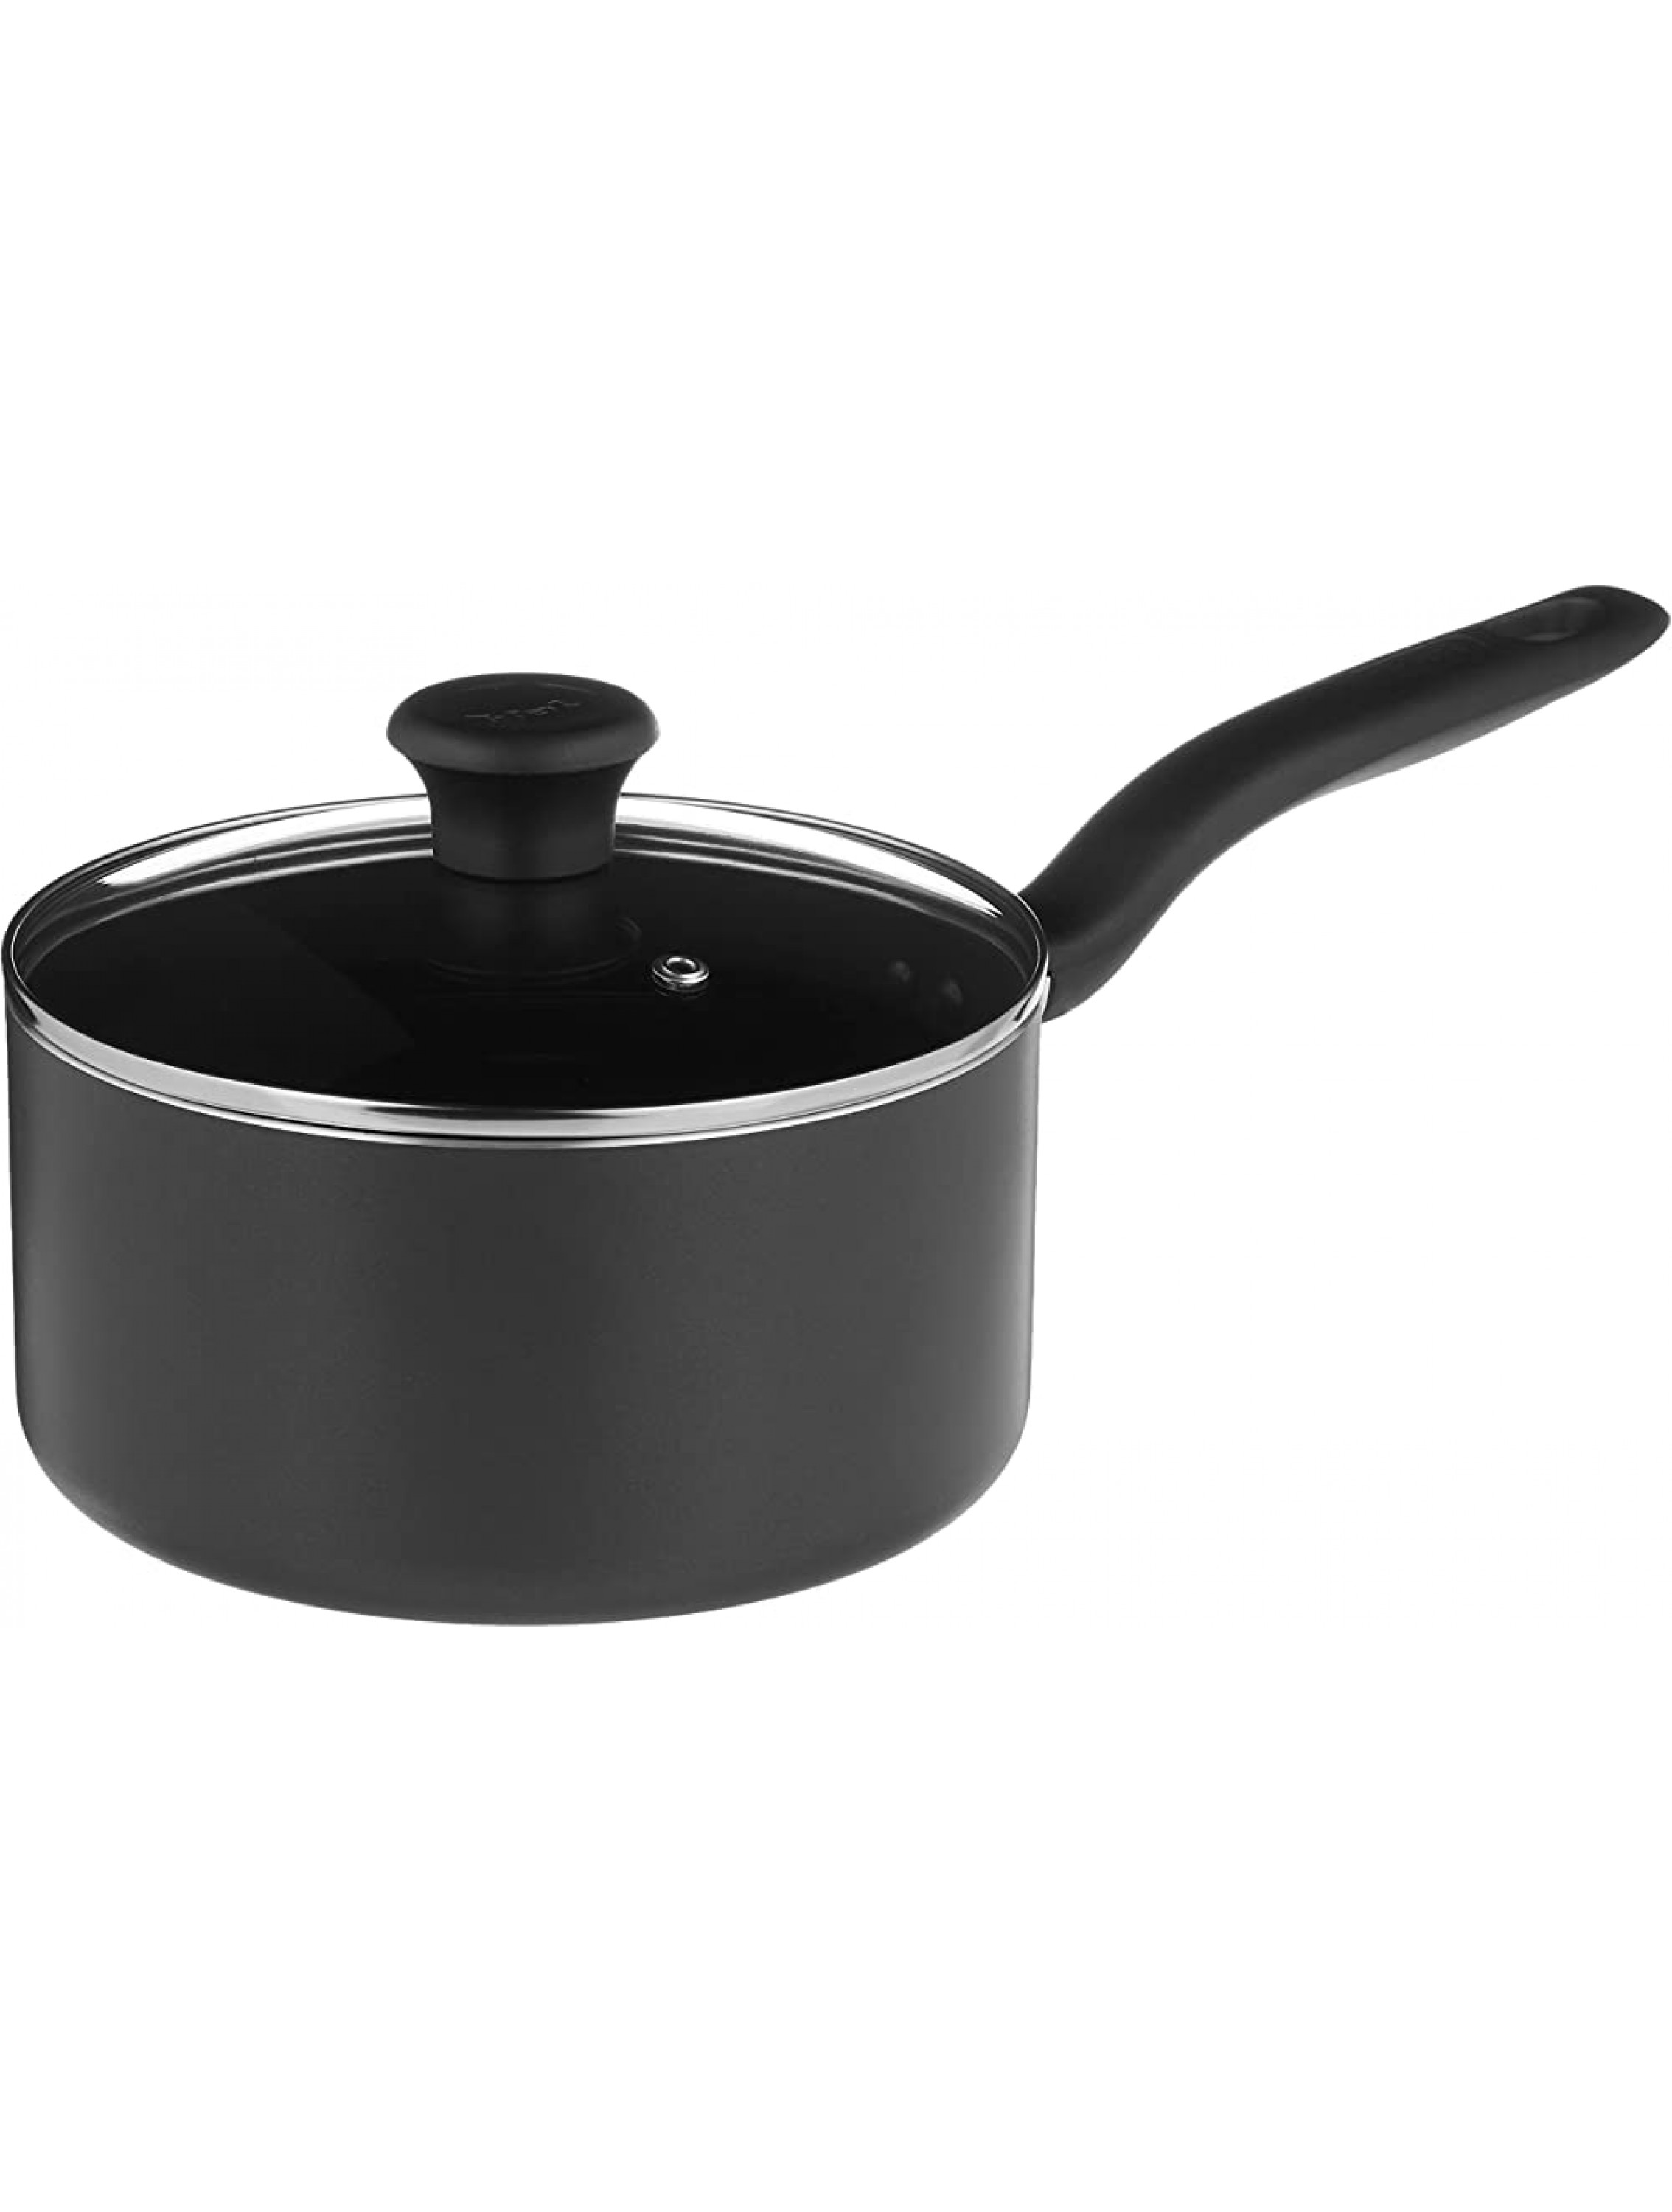 T-fal B16790 Initiatives Nonstick Inside and Out Sauce Pan with Glass Lid Cover Cookware 3-Quart Gray - BVPPAV2YJ